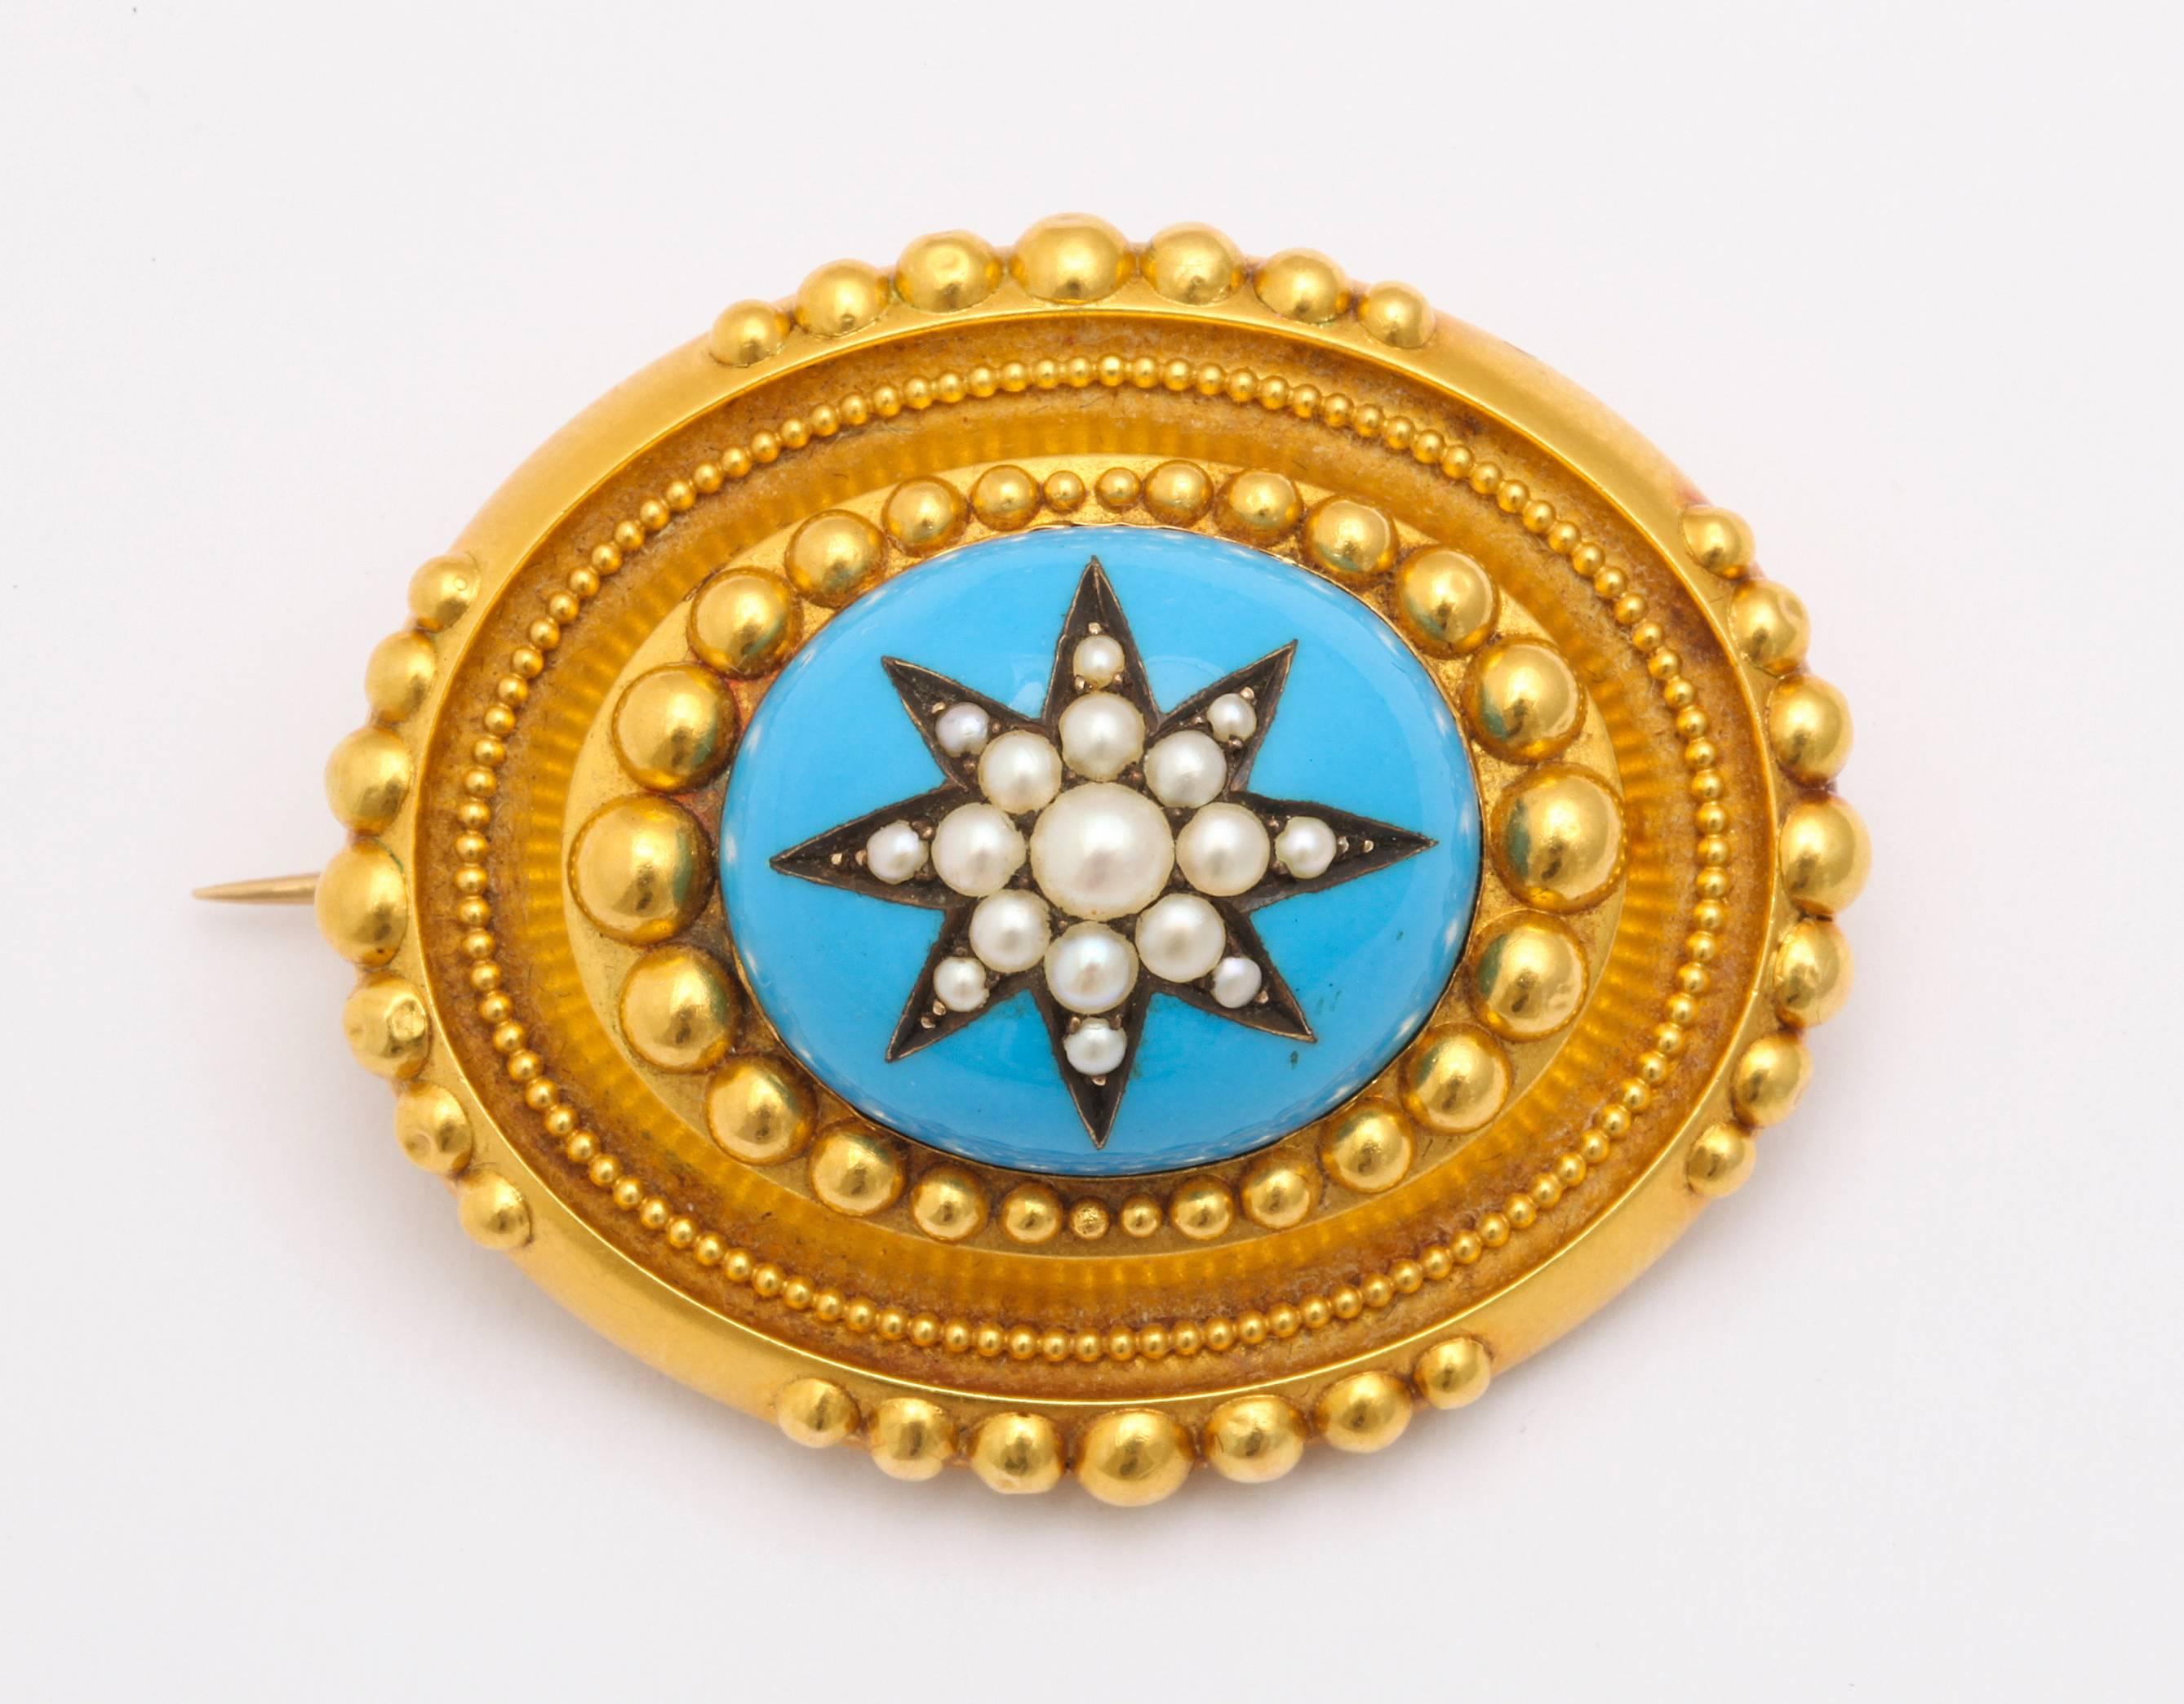 A granulated jewel of a brooch, set in 18kt soft toned gold, showcases a star of gleaming natural pearls on turquoise blue enamel. Layers and texture were created by the jeweler's hand that placed an oval of granulation around the enamel, another of